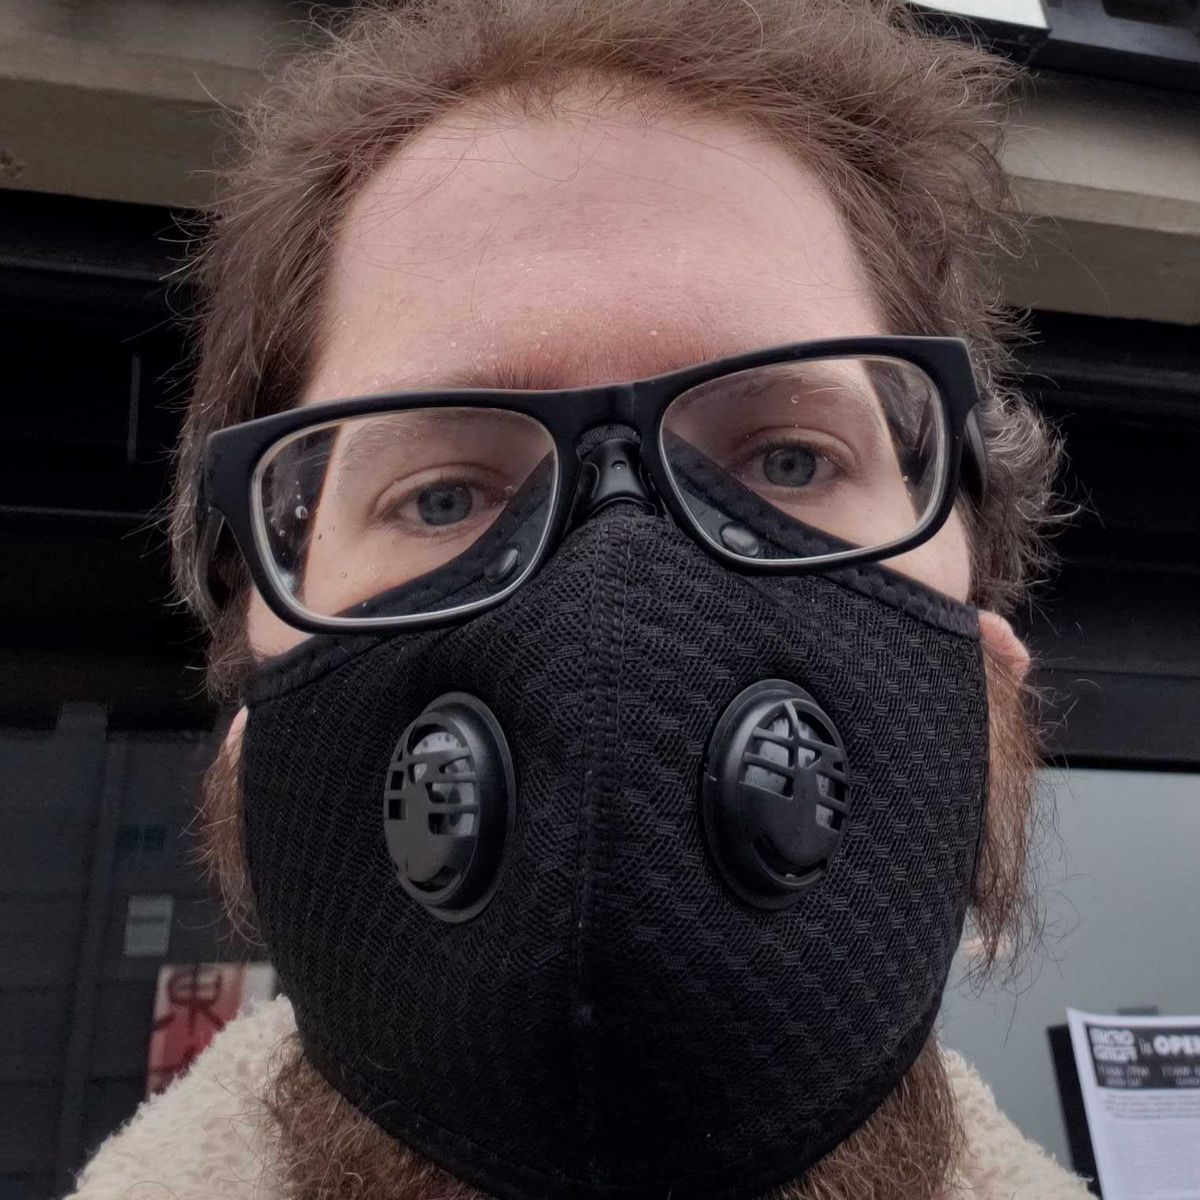 How to stop your glasses from fogging up when you wear a mask – DLSServe